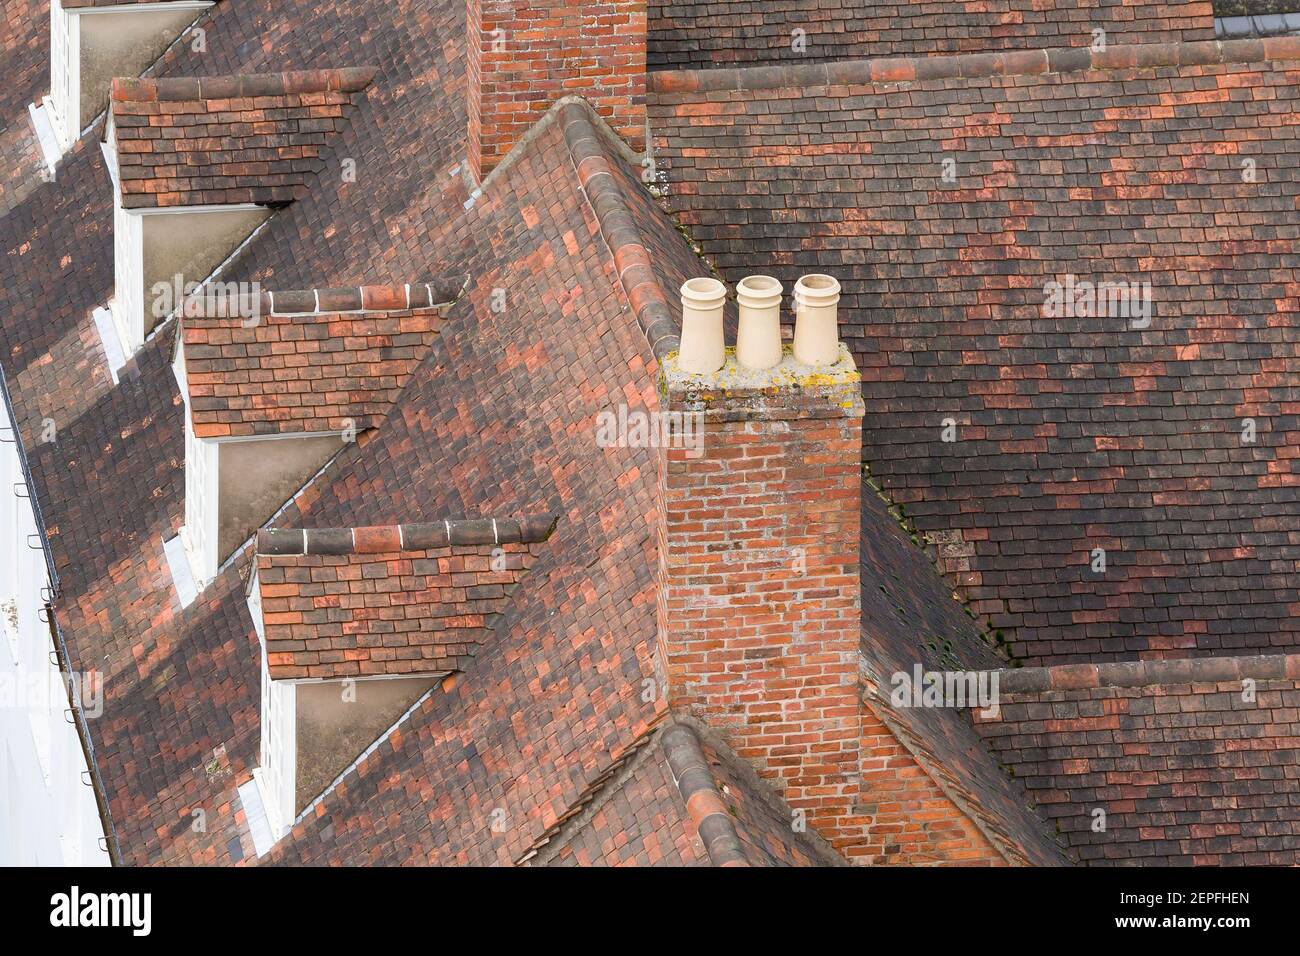 Rooves of a row of old terraced houses in Warwick, UK, aerial view Stock Photo